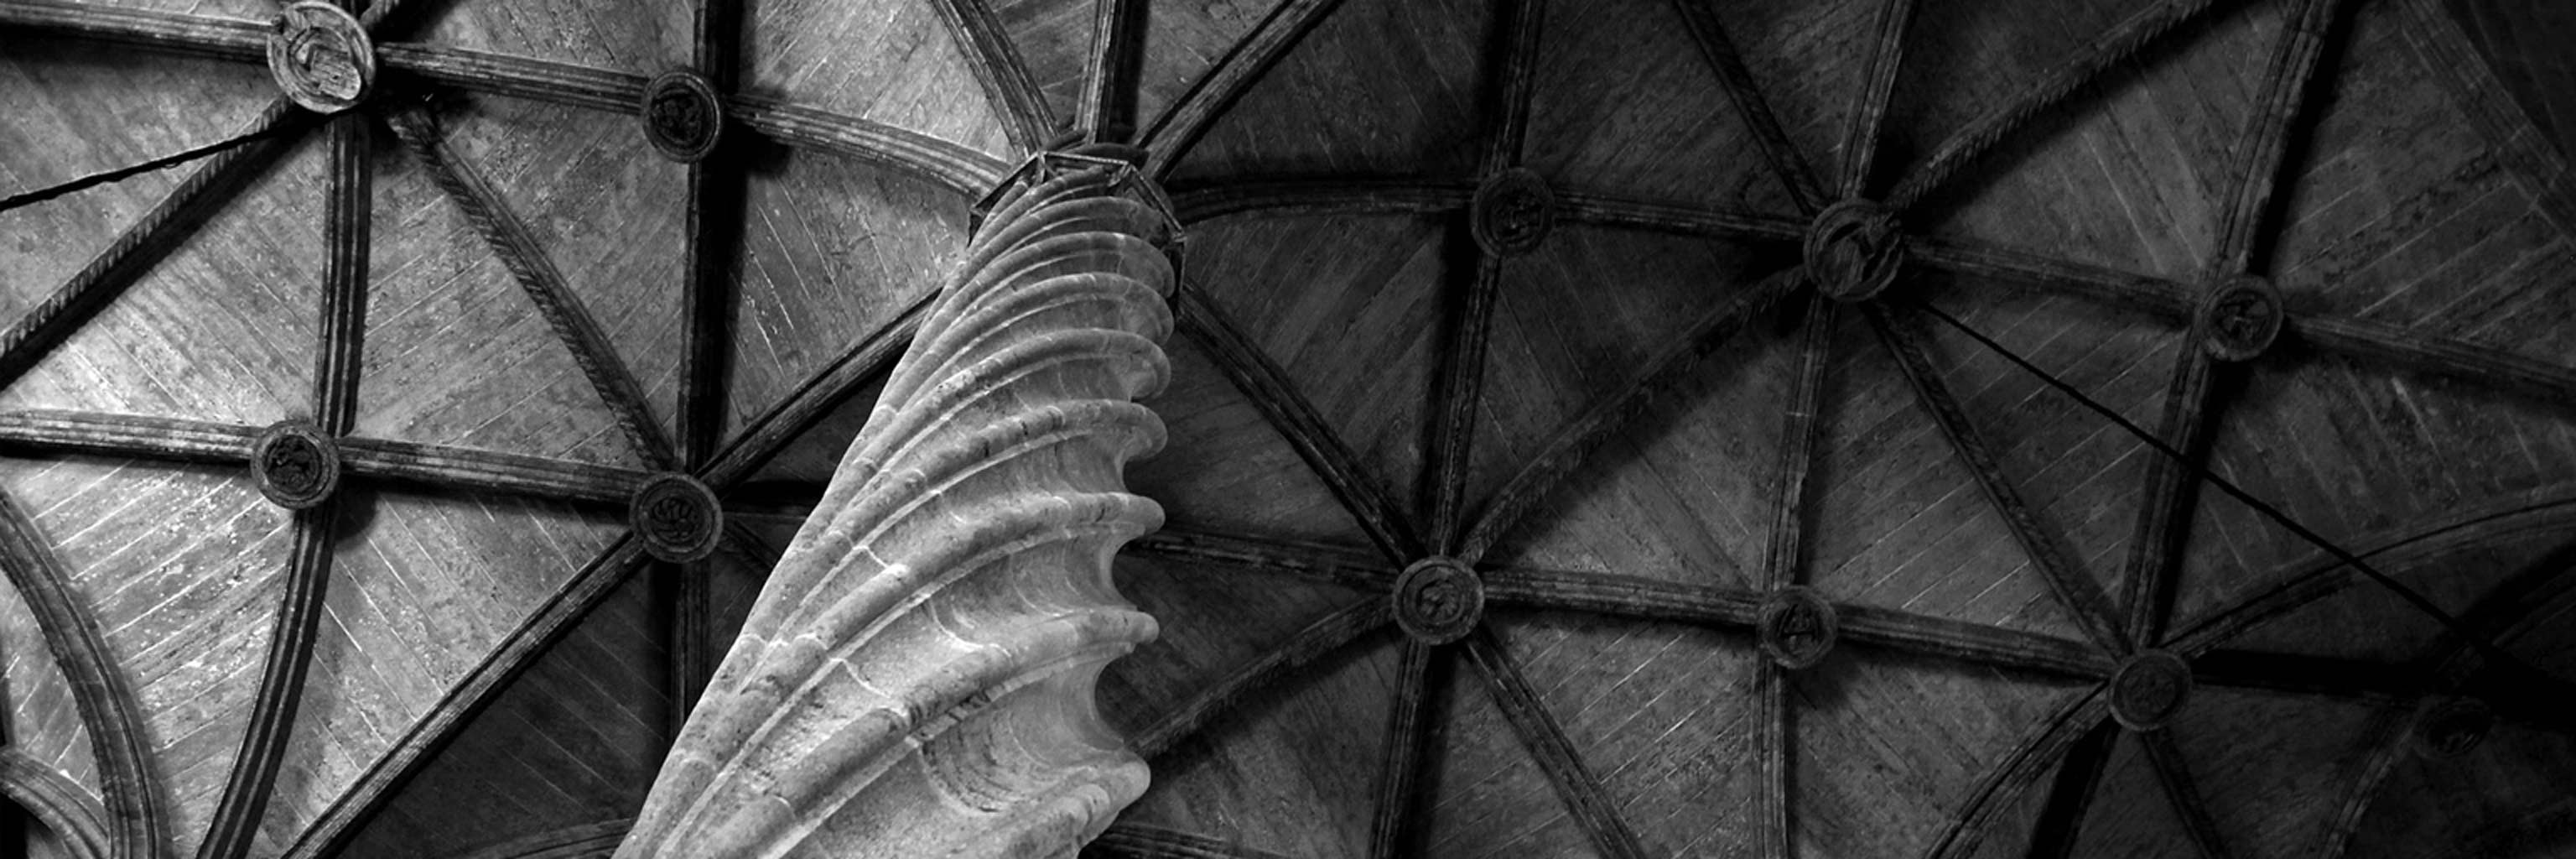 spiral pillar holding up architectural ceiling